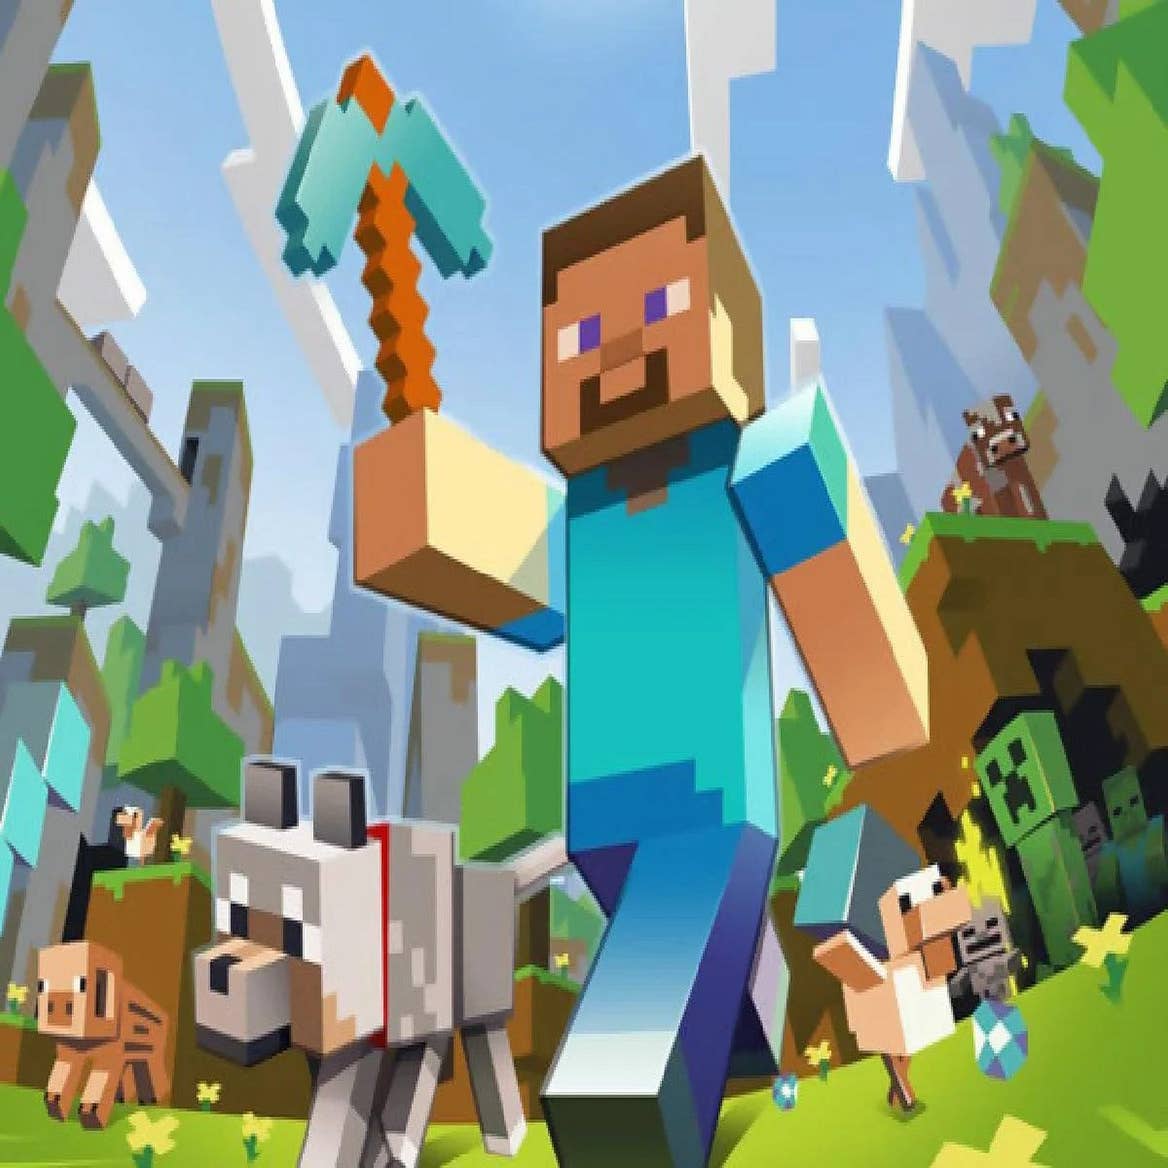 Minecraft now has one unified launcher on PC